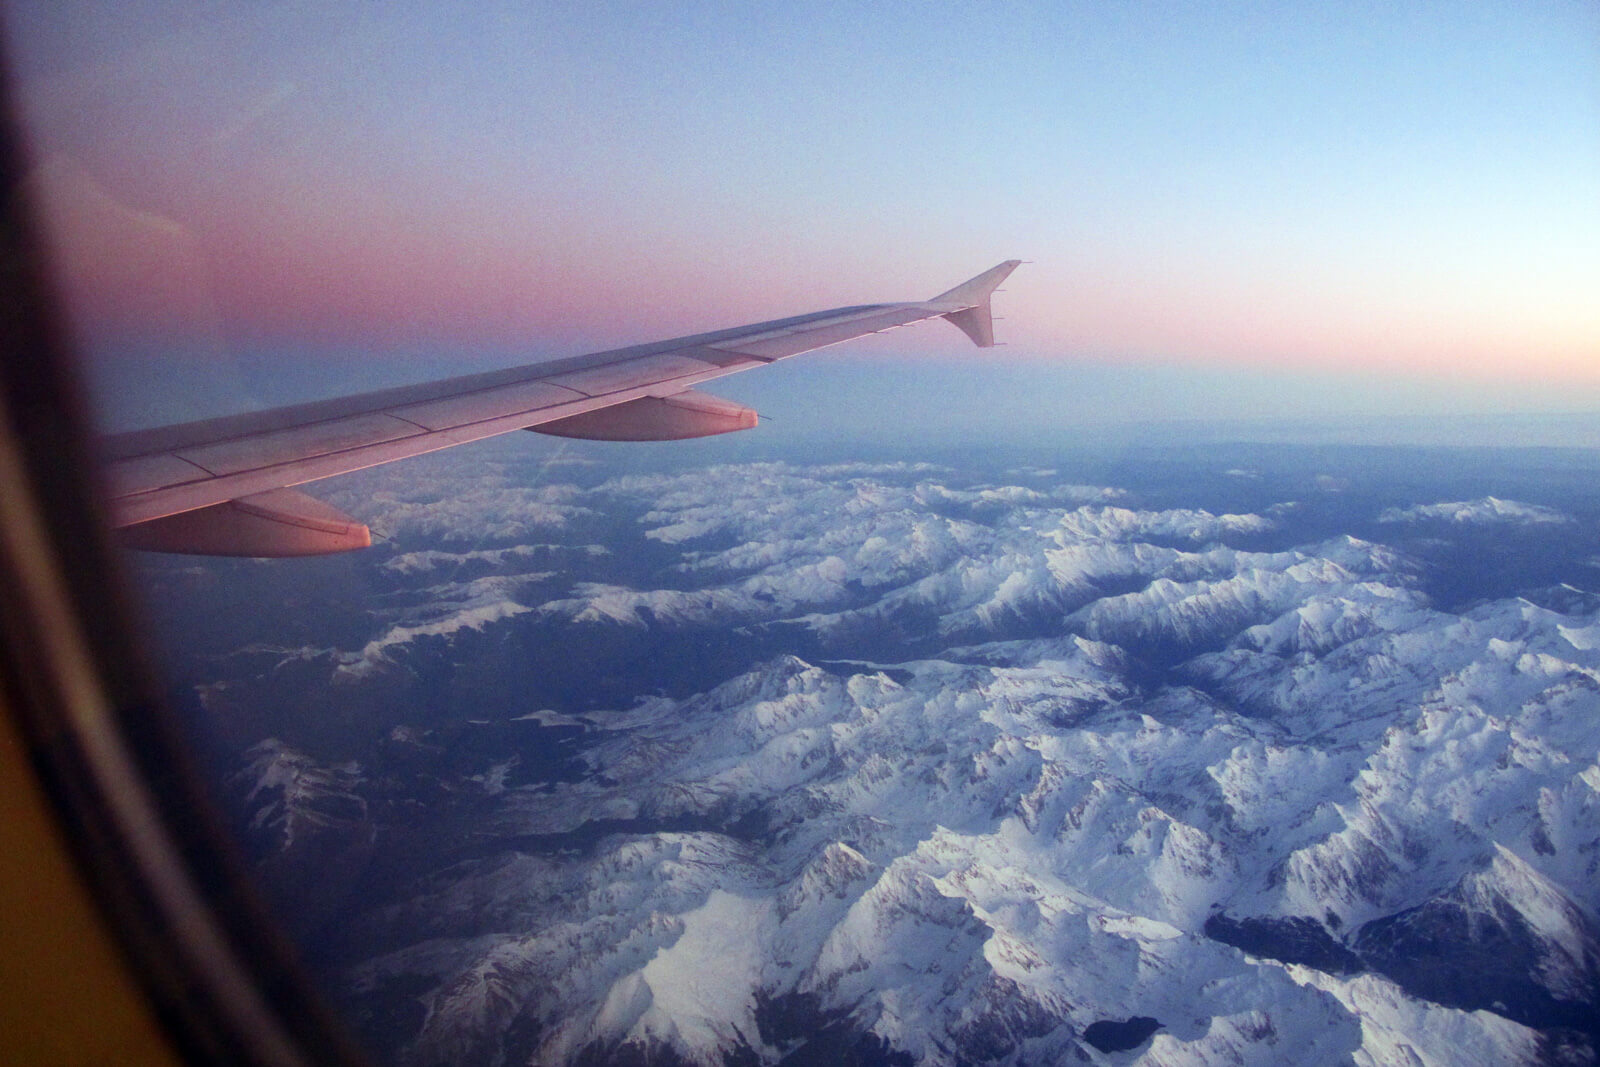 Airplane View above Pyrenees - Dec 2011